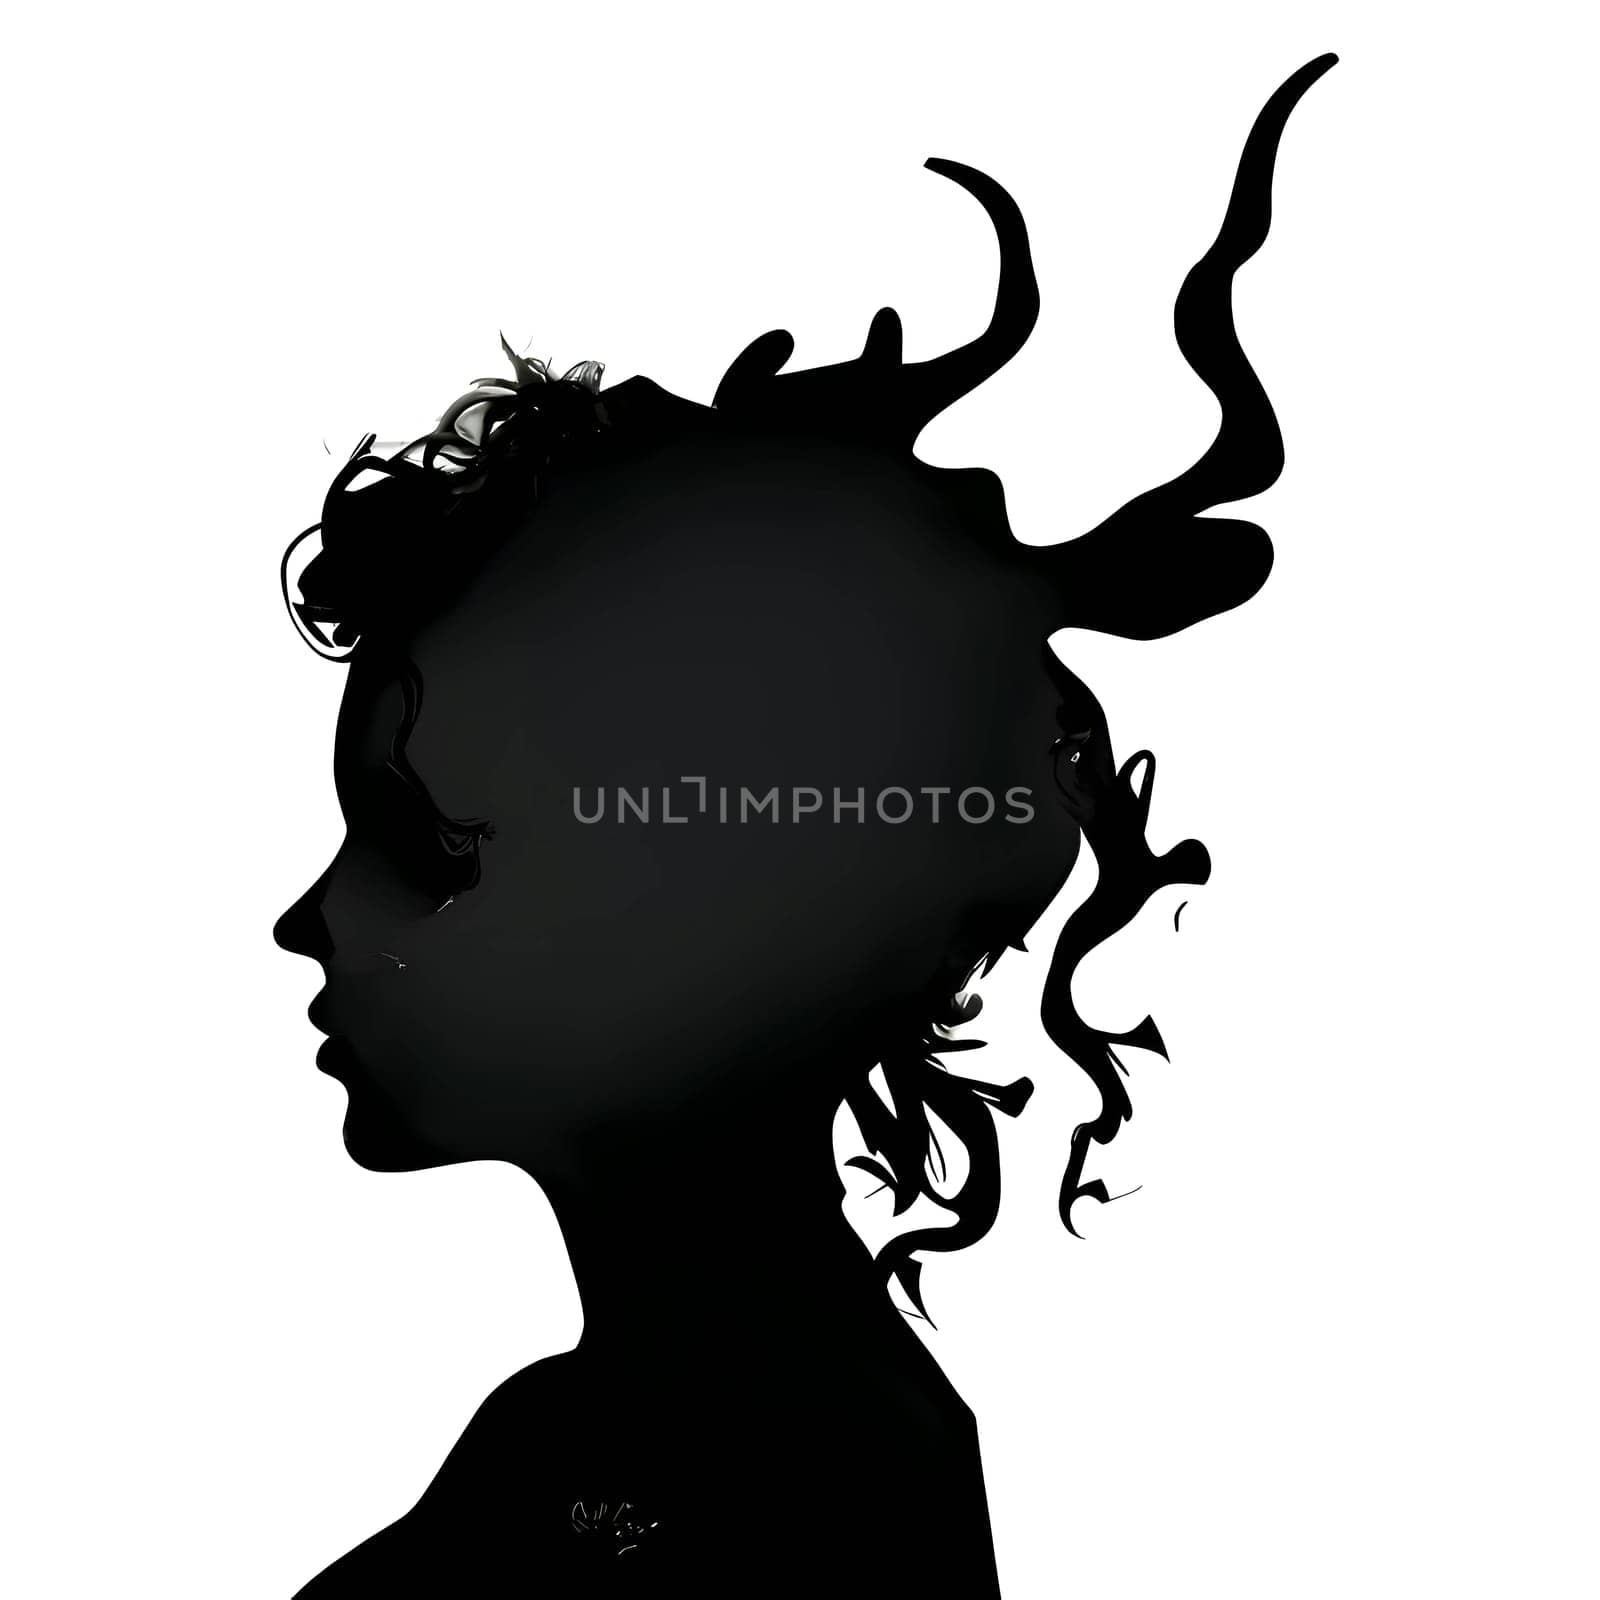 Vector illustration of a women with long hair in black silhouette against a clean white background, capturing graceful forms.